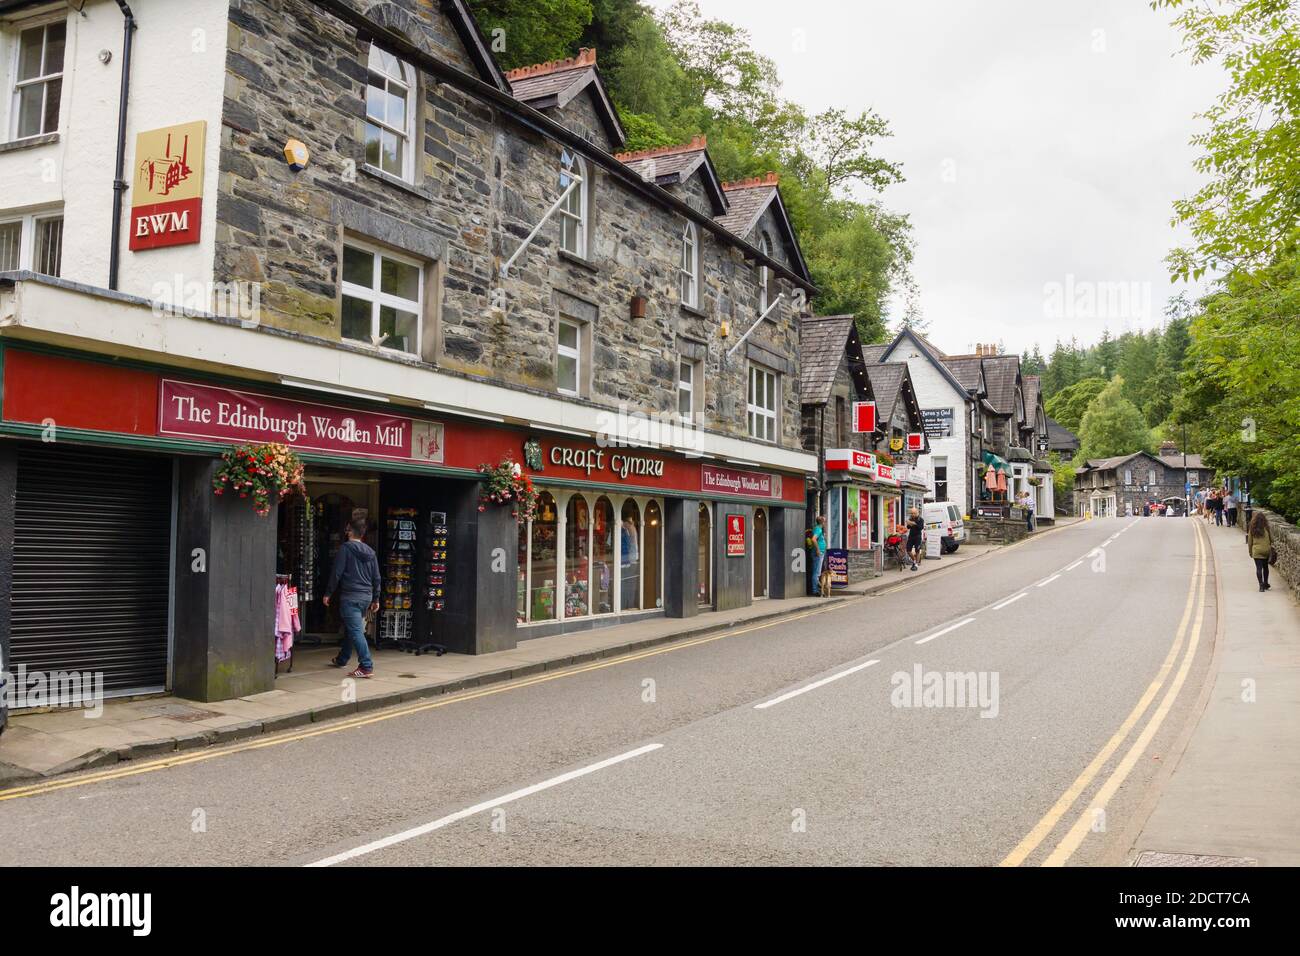 The Edinburgh Woollen Mill Craft Cymru store on the high street of Betws-y-Coed in the Snowdonia National Park North Wales Stock Photo